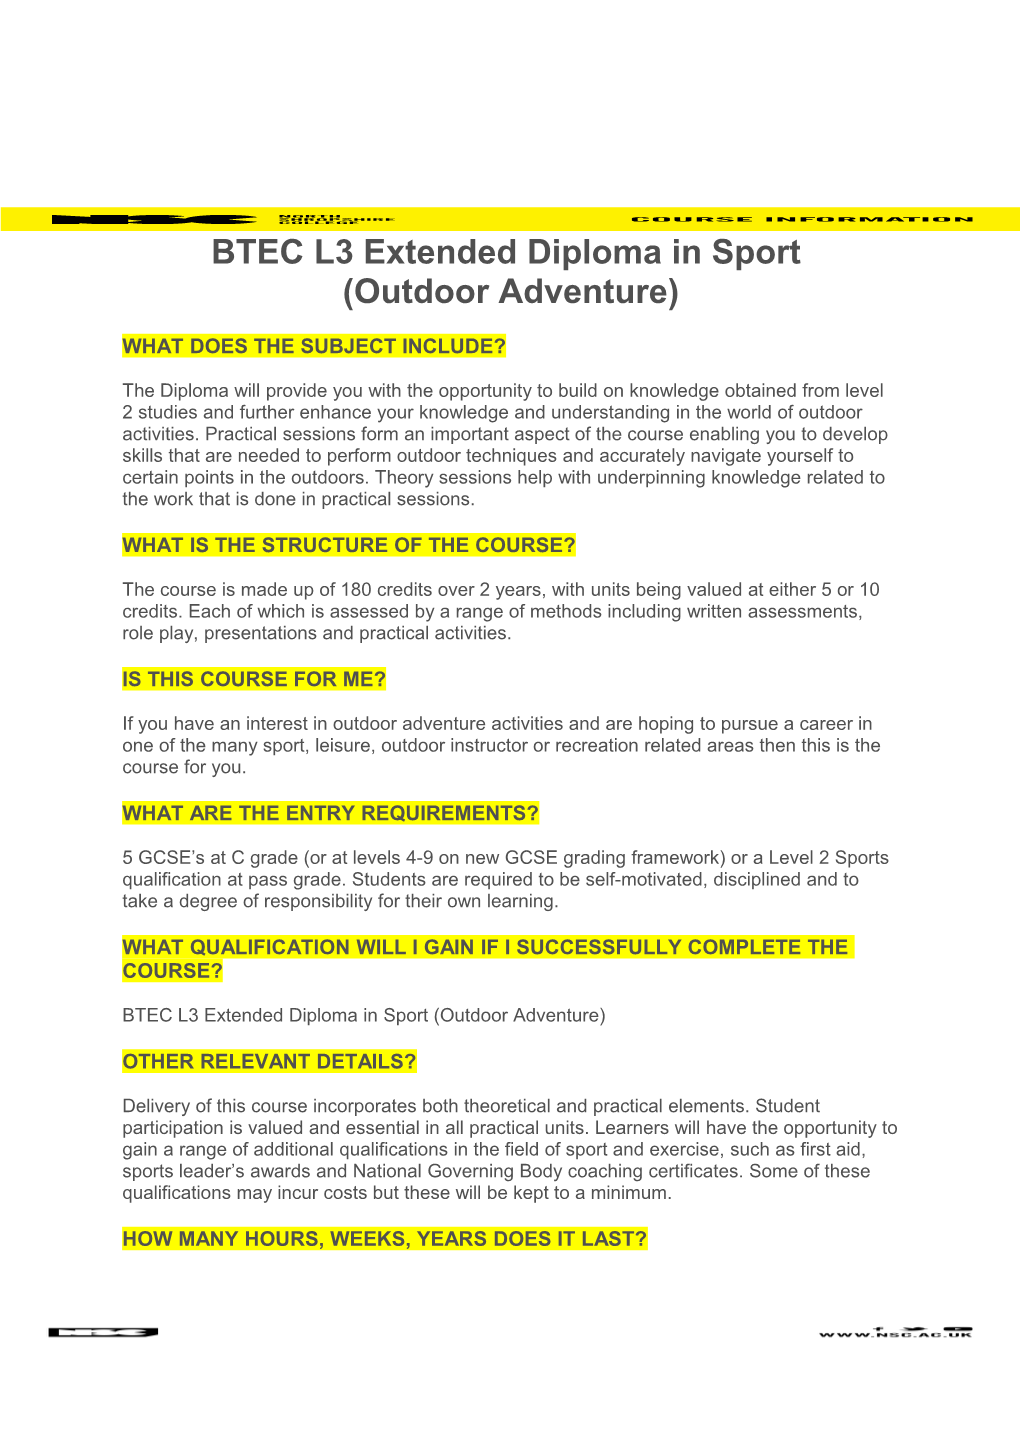 BTEC L3 Extended Diploma in Sport